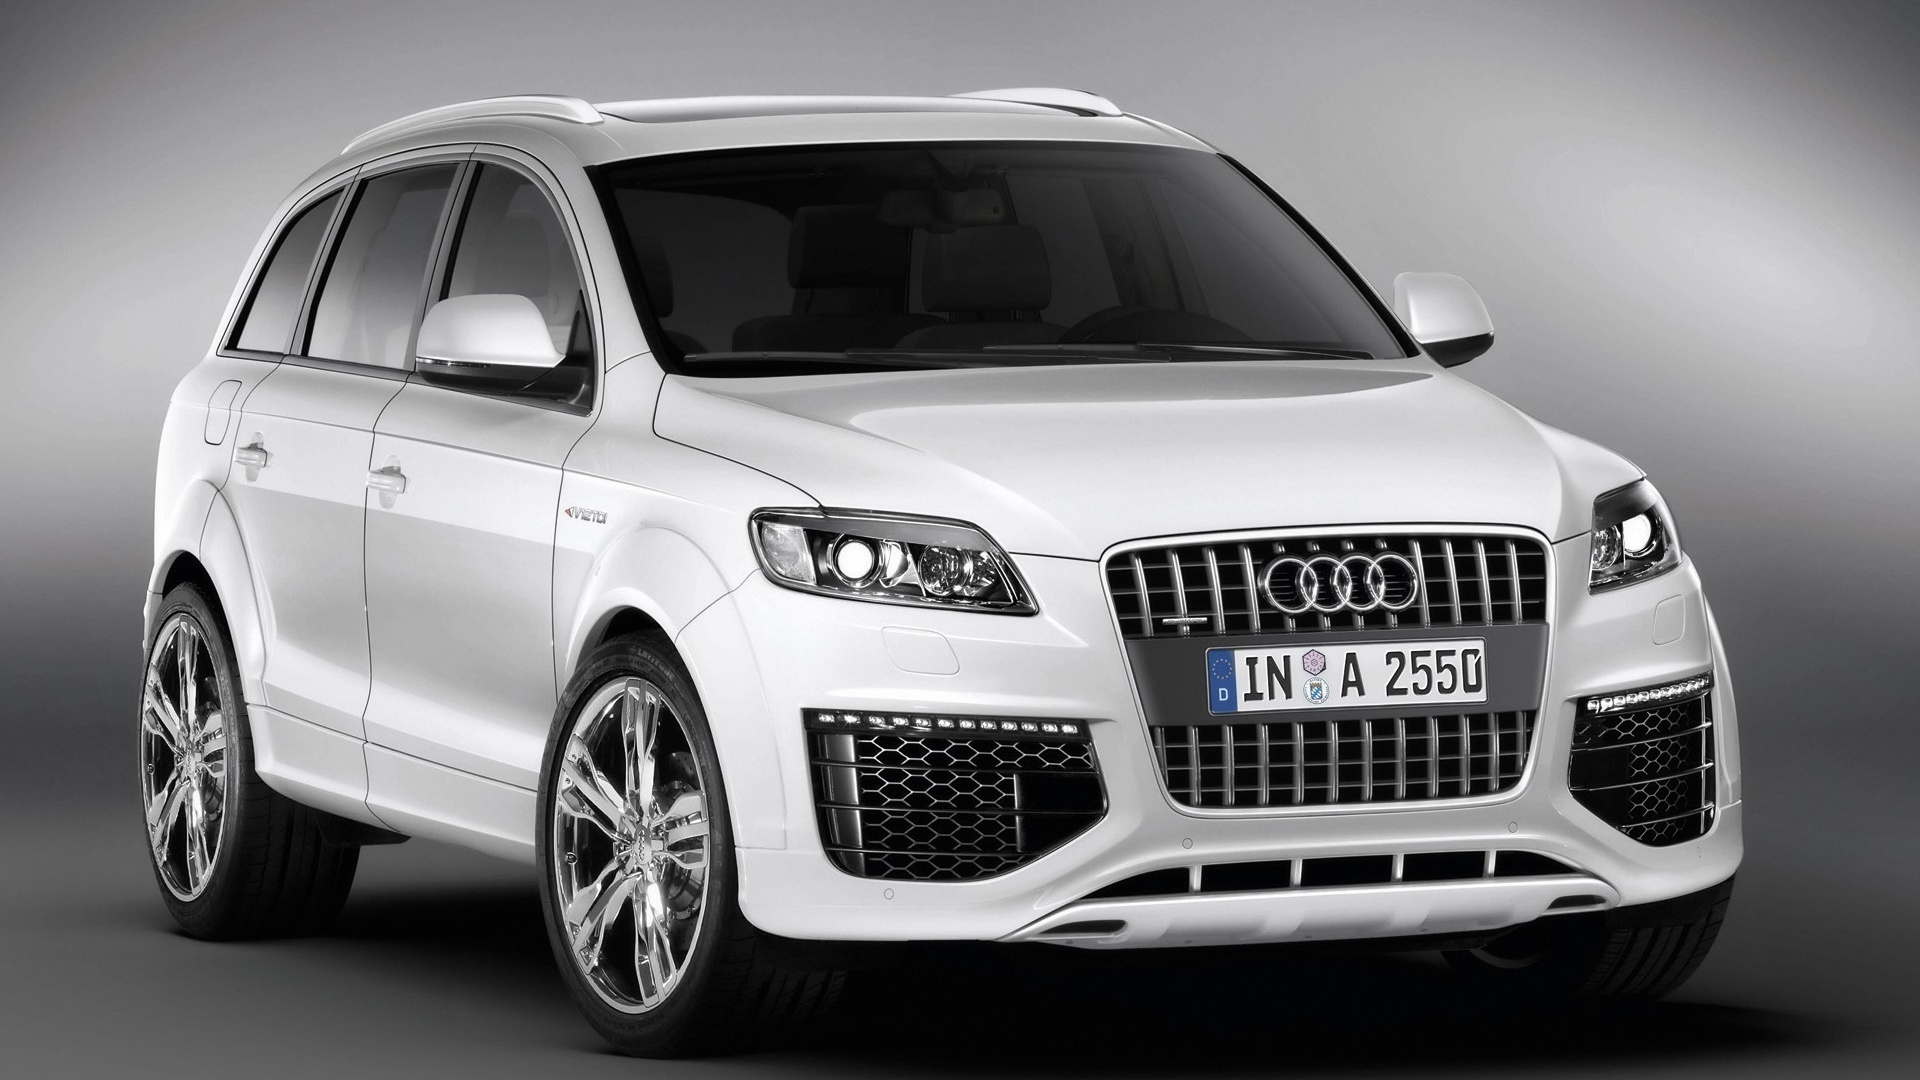 Audi Q7 Coastline front and side for 1920 x 1080 HDTV 1080p resolution